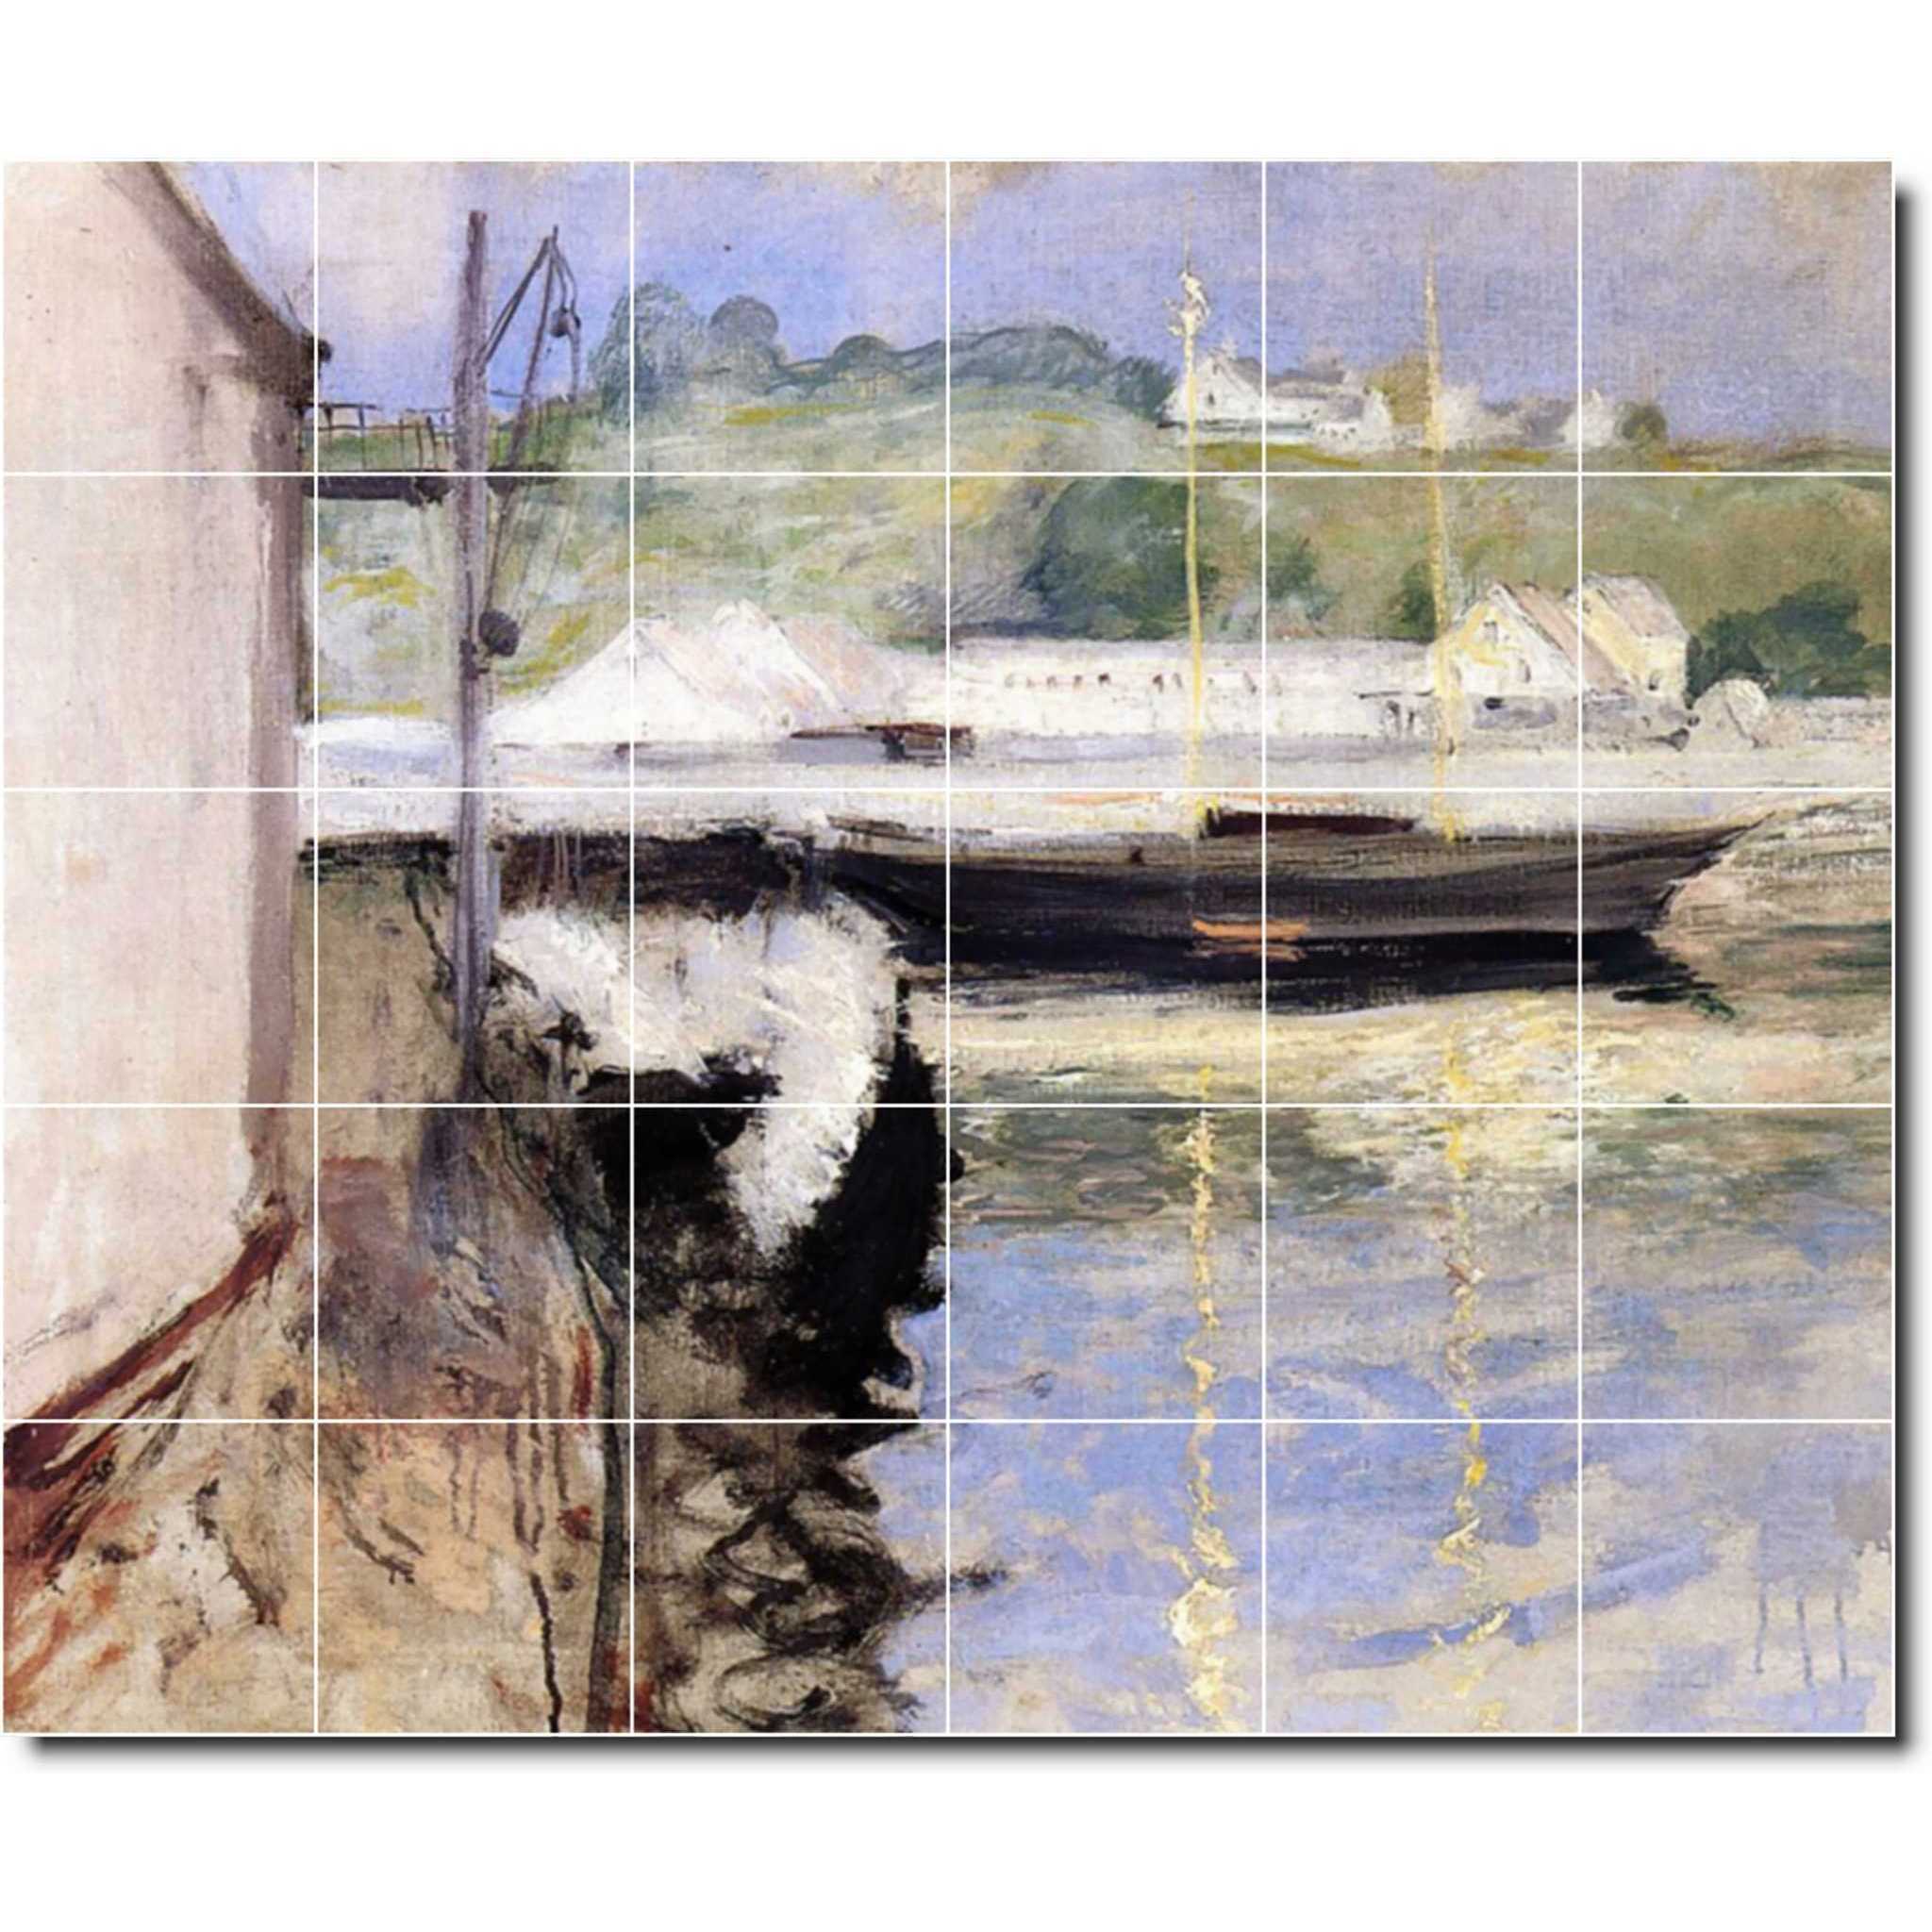 william chase waterfront painting ceramic tile mural p01624